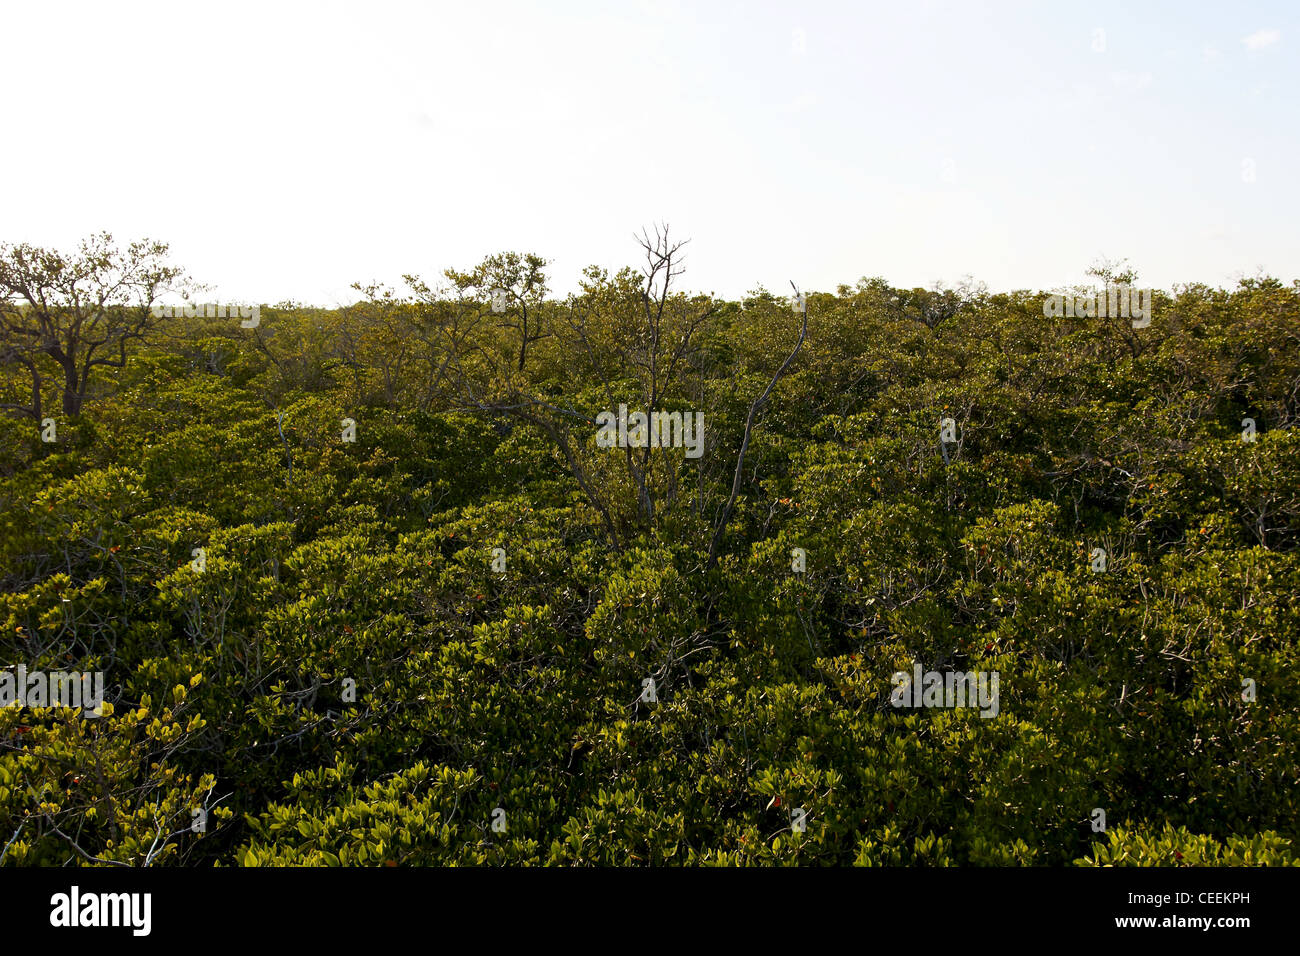 A view over seemingly boundless mangrove forests in Florida, USA. Stock Photo